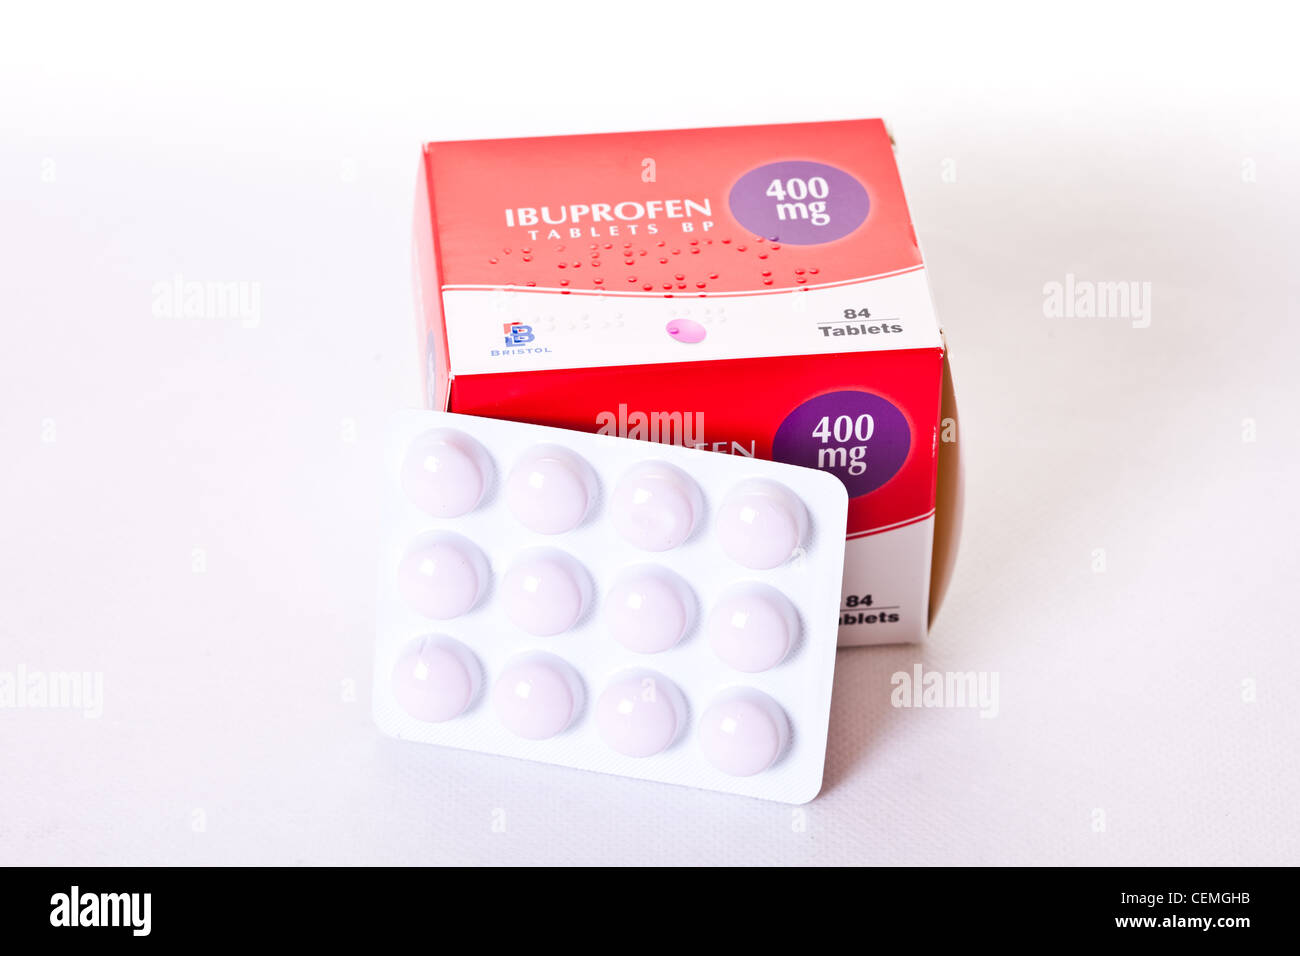 ibuprofen 400mg tablet box and blister pack Stock Photo - Alamy